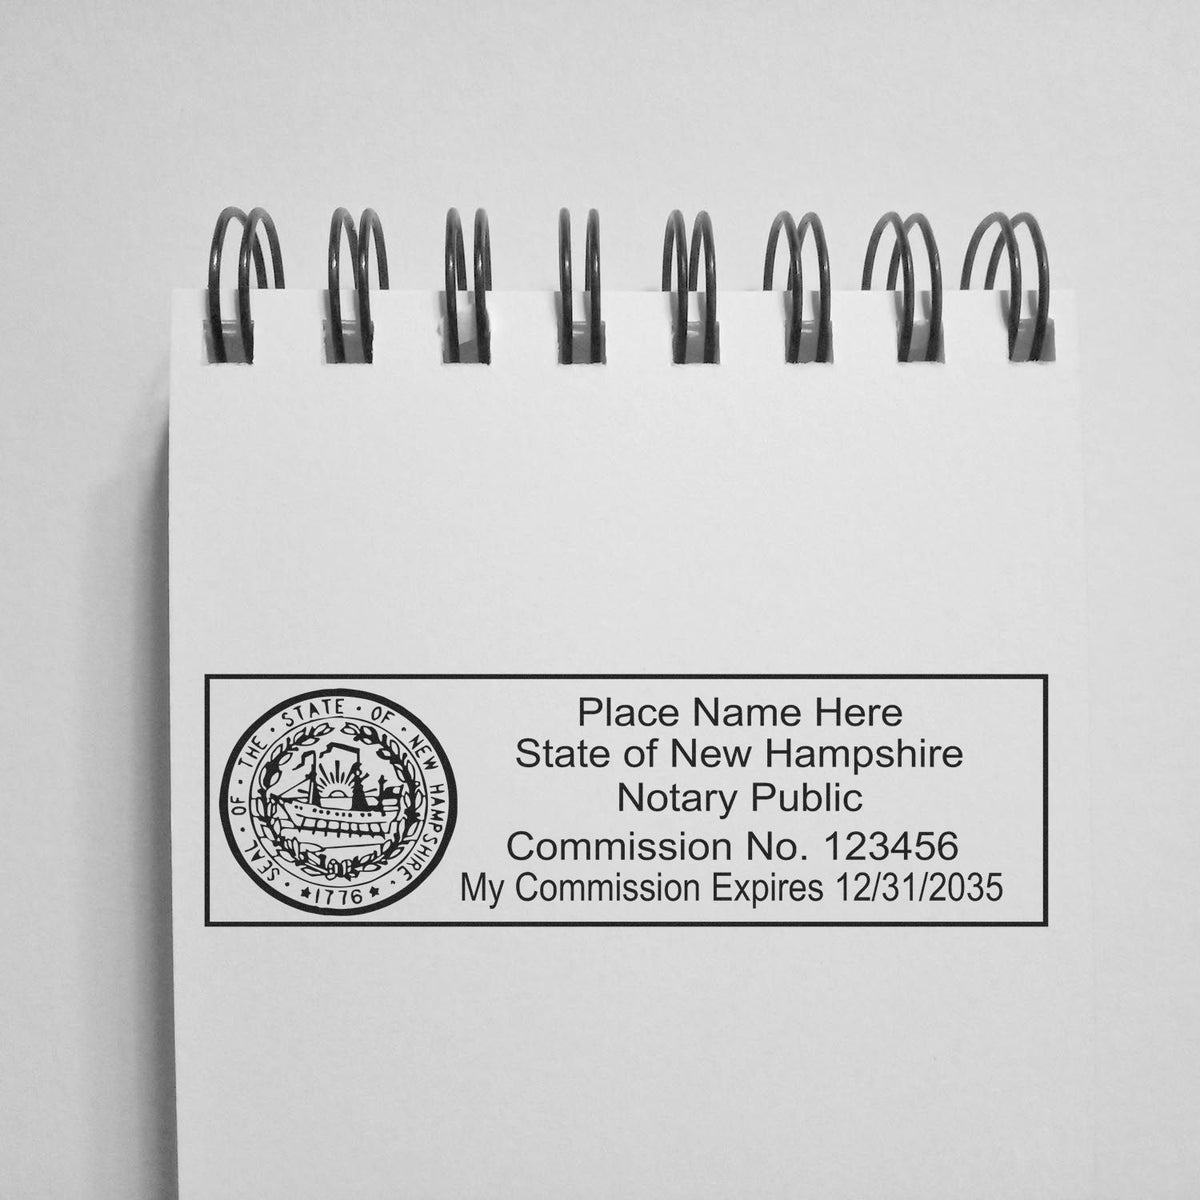 A stamped impression of the Slim Pre-Inked State Seal Notary Stamp for New Hampshire in this stylish lifestyle photo, setting the tone for a unique and personalized product.